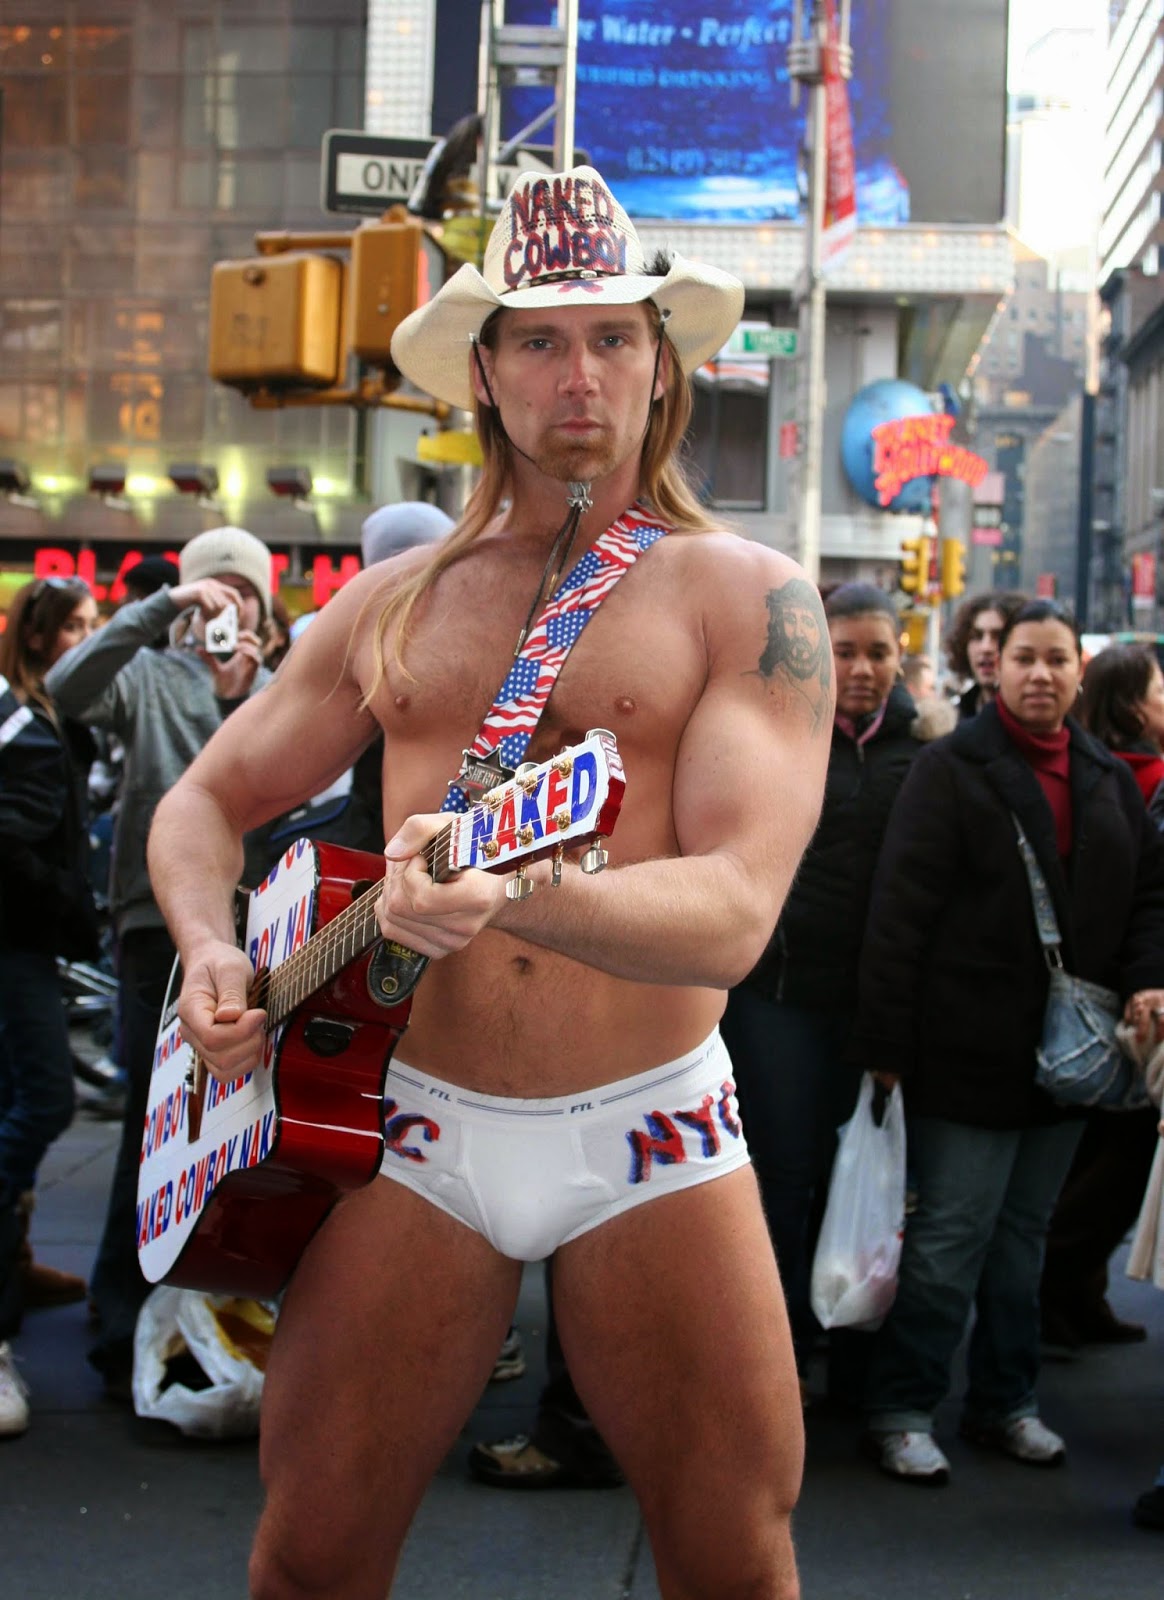 Times Square Naked Man Is Top Fashion Model | National 